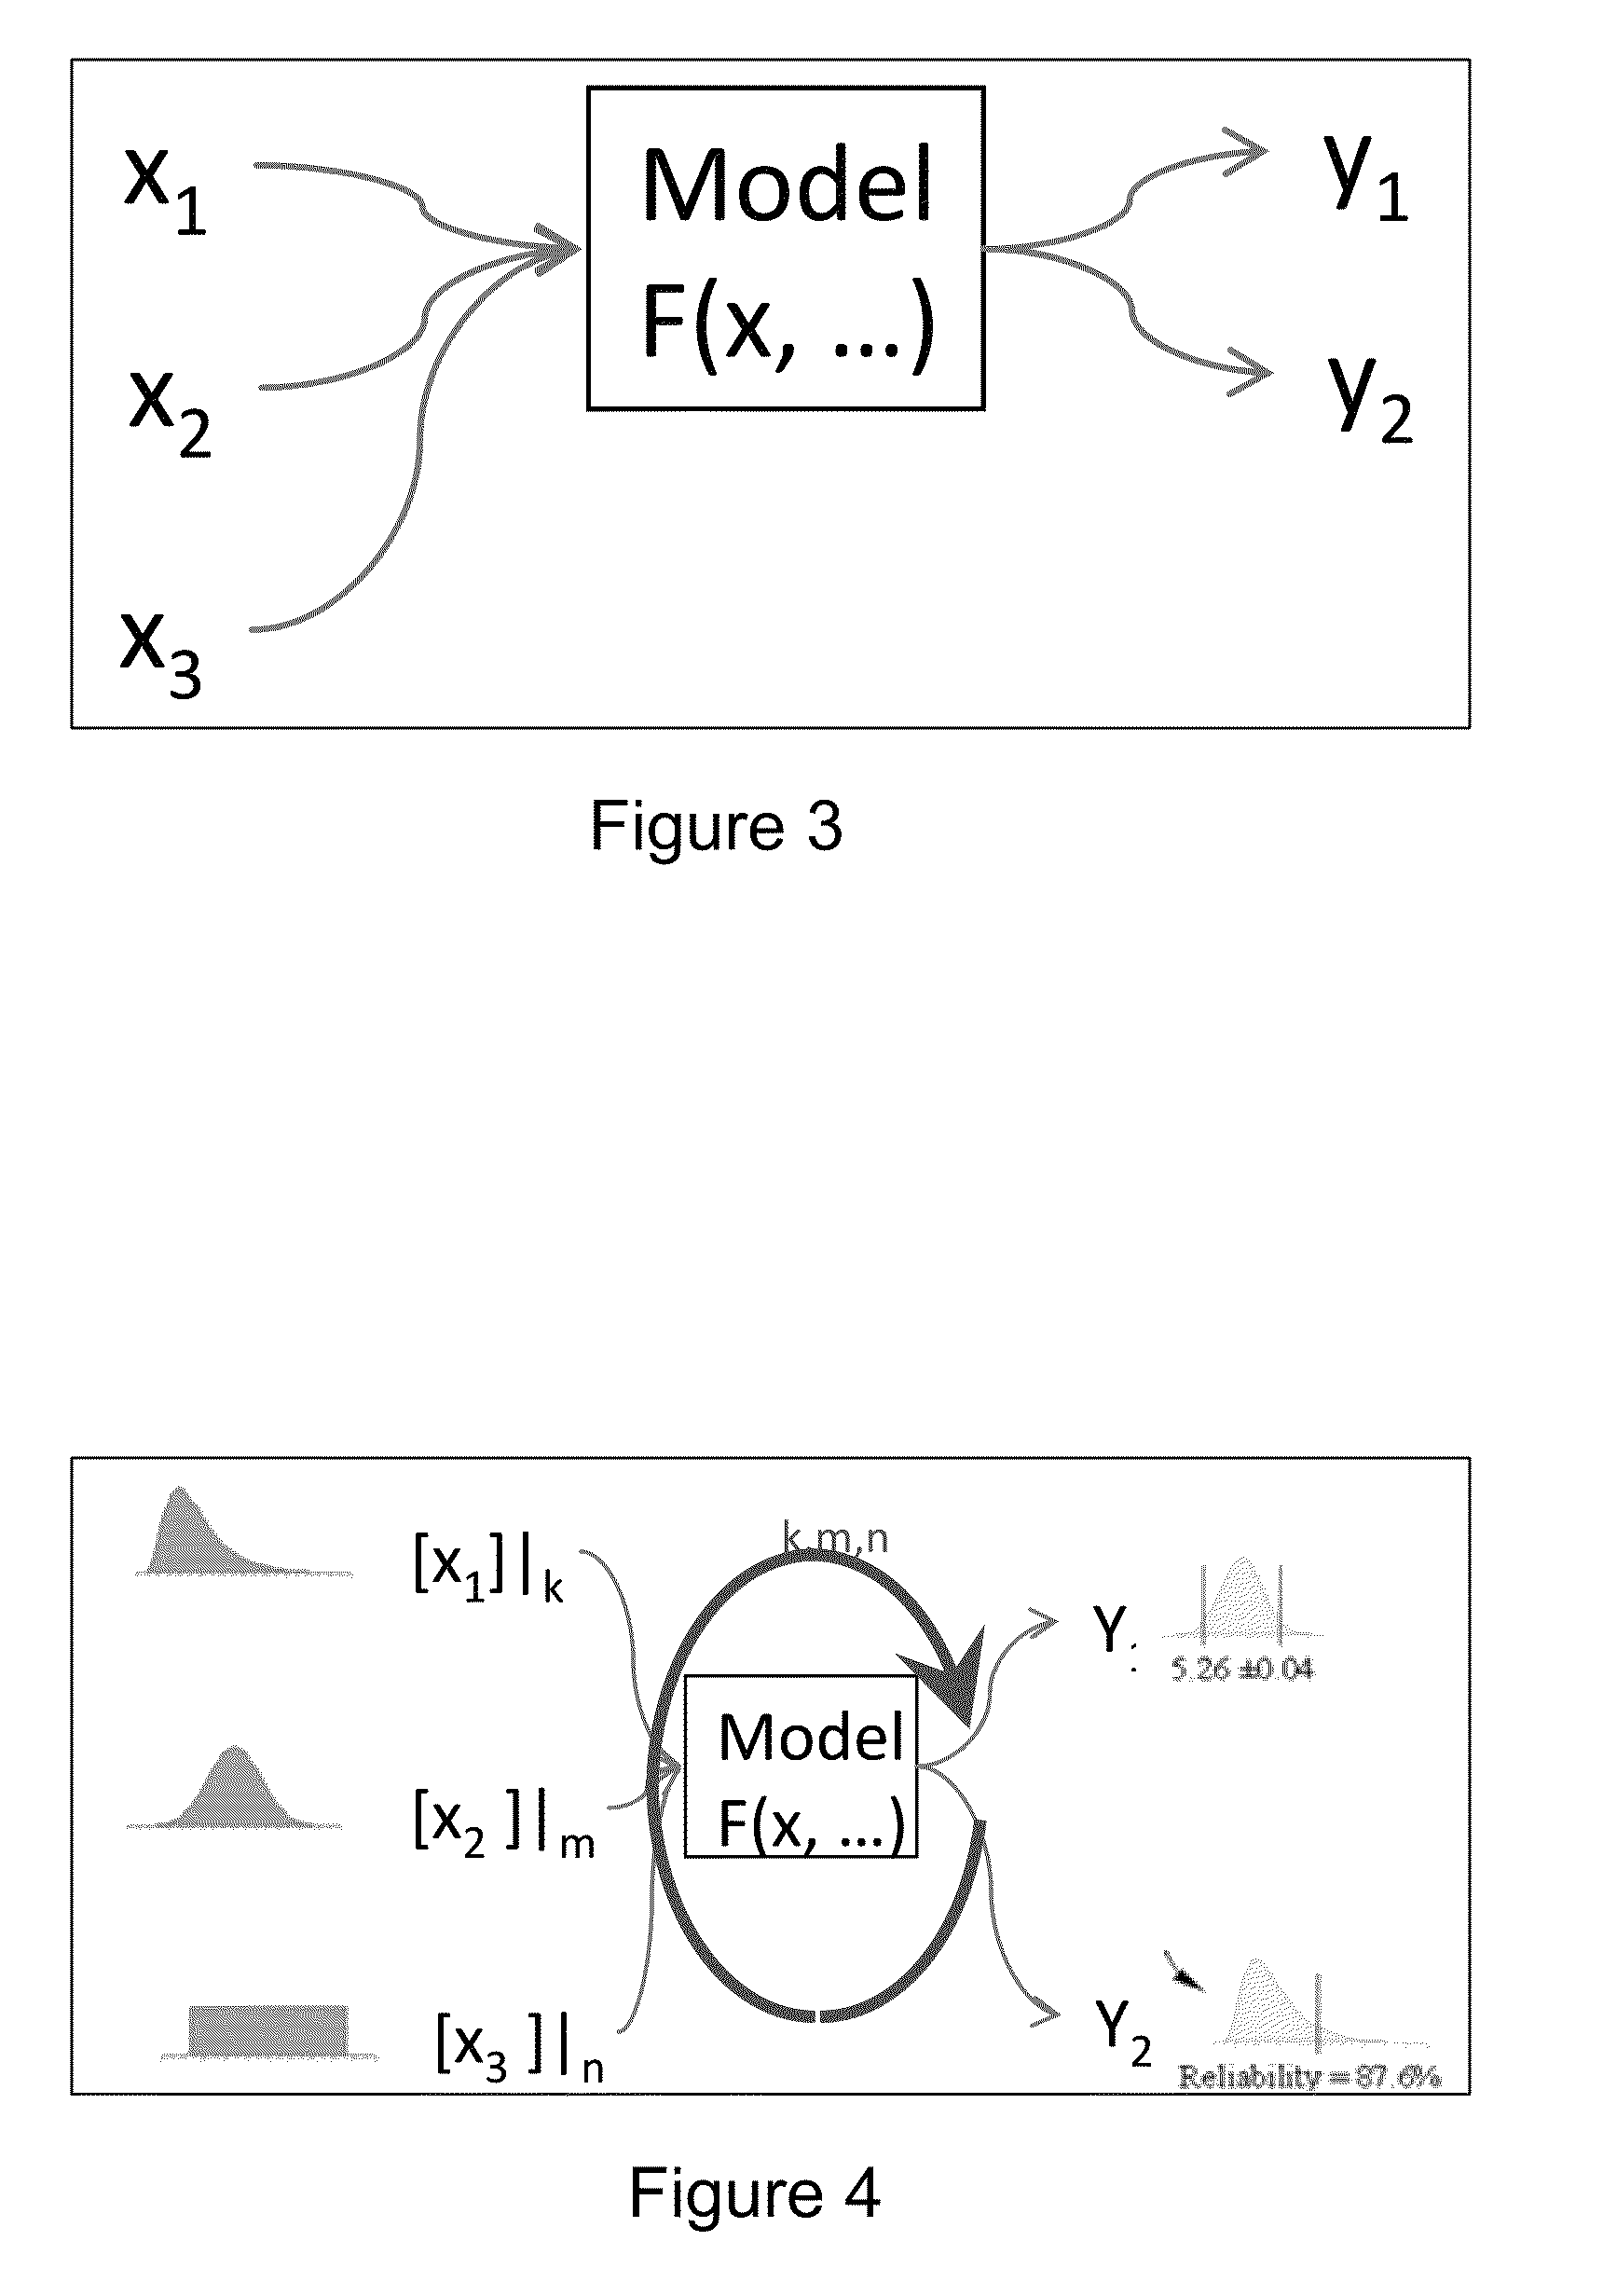 Hierarchical variation analysis of integrated circuits